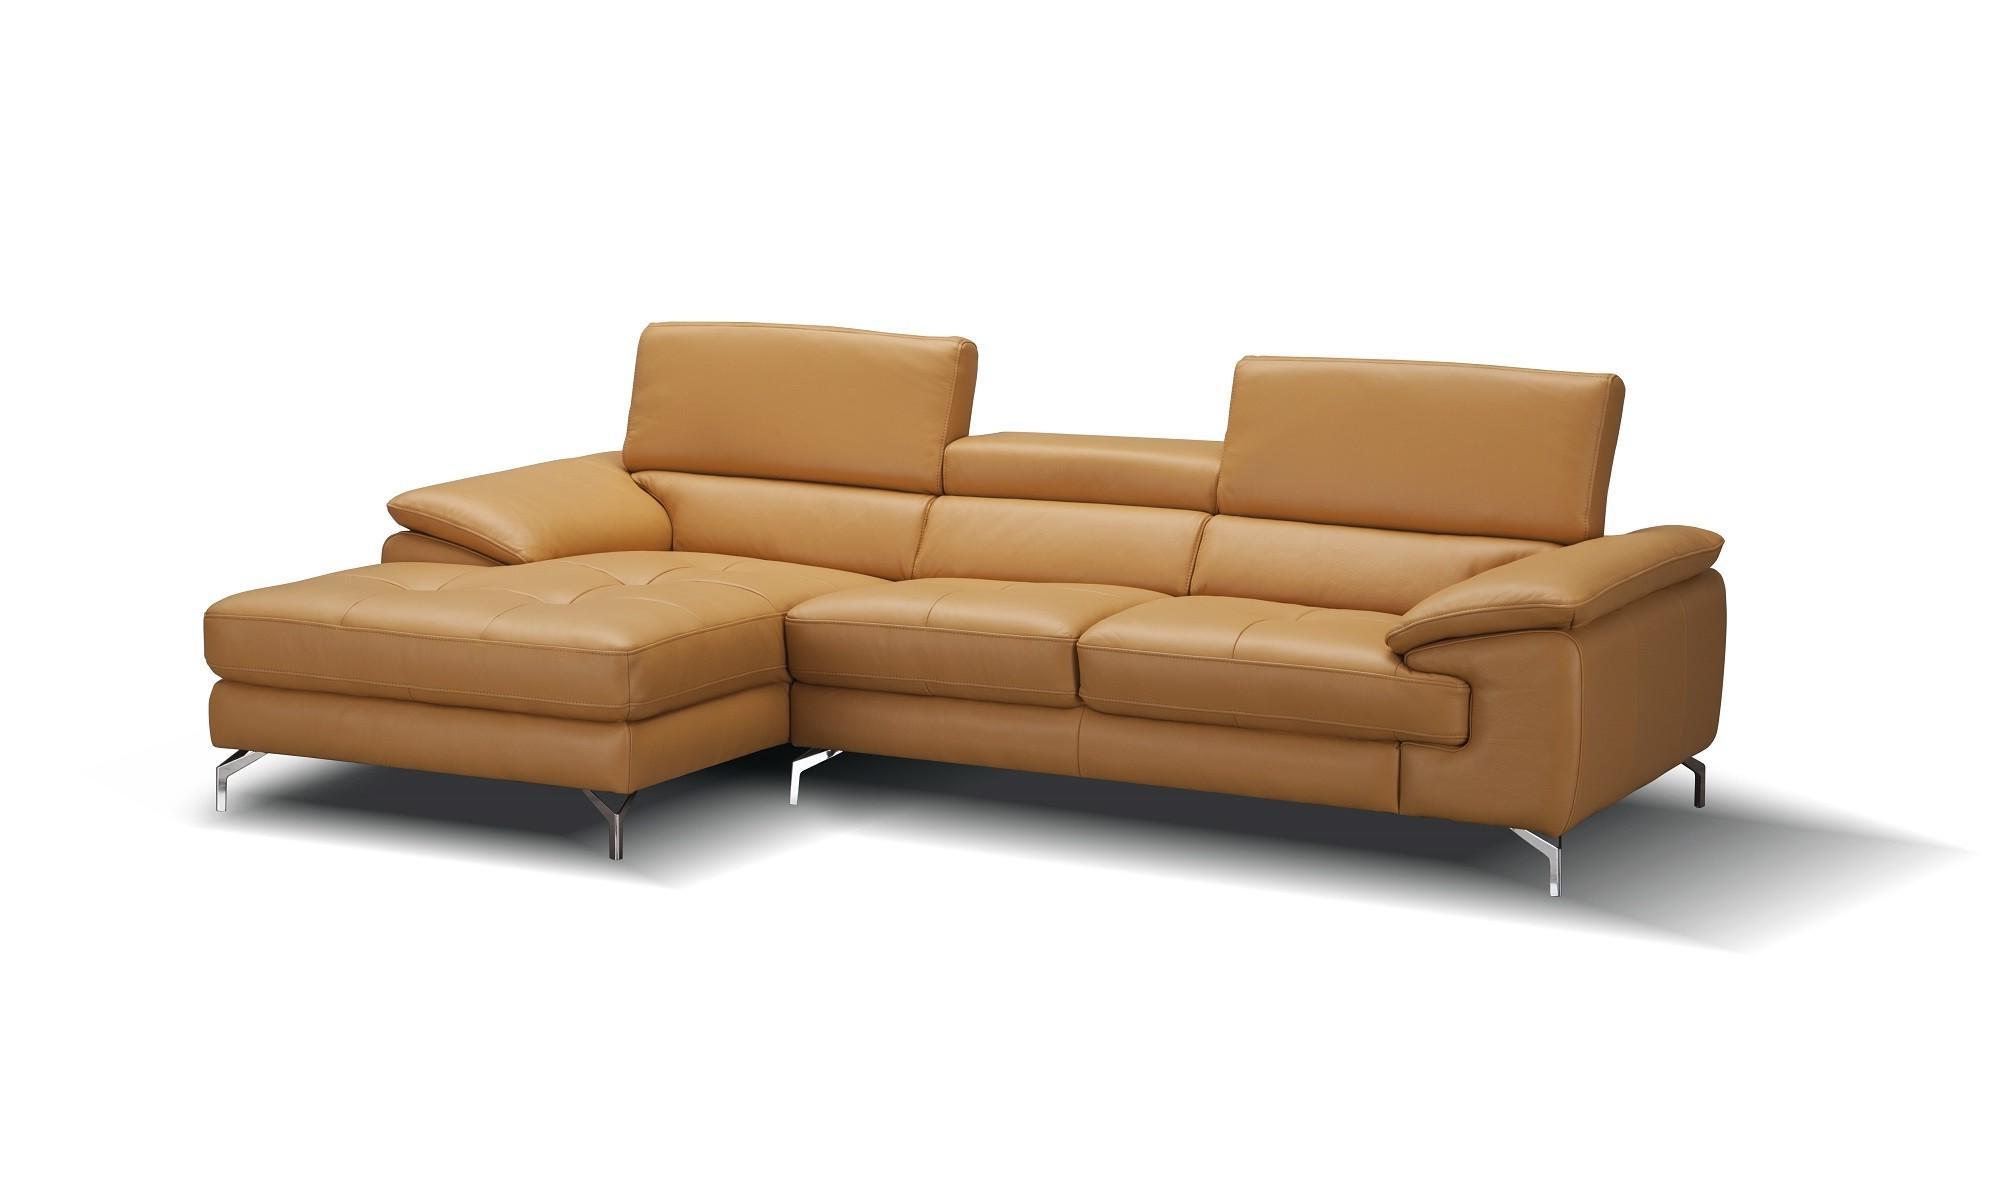 Contemporary Sectional Sofa A973b SKU 179064 in Beige Leather